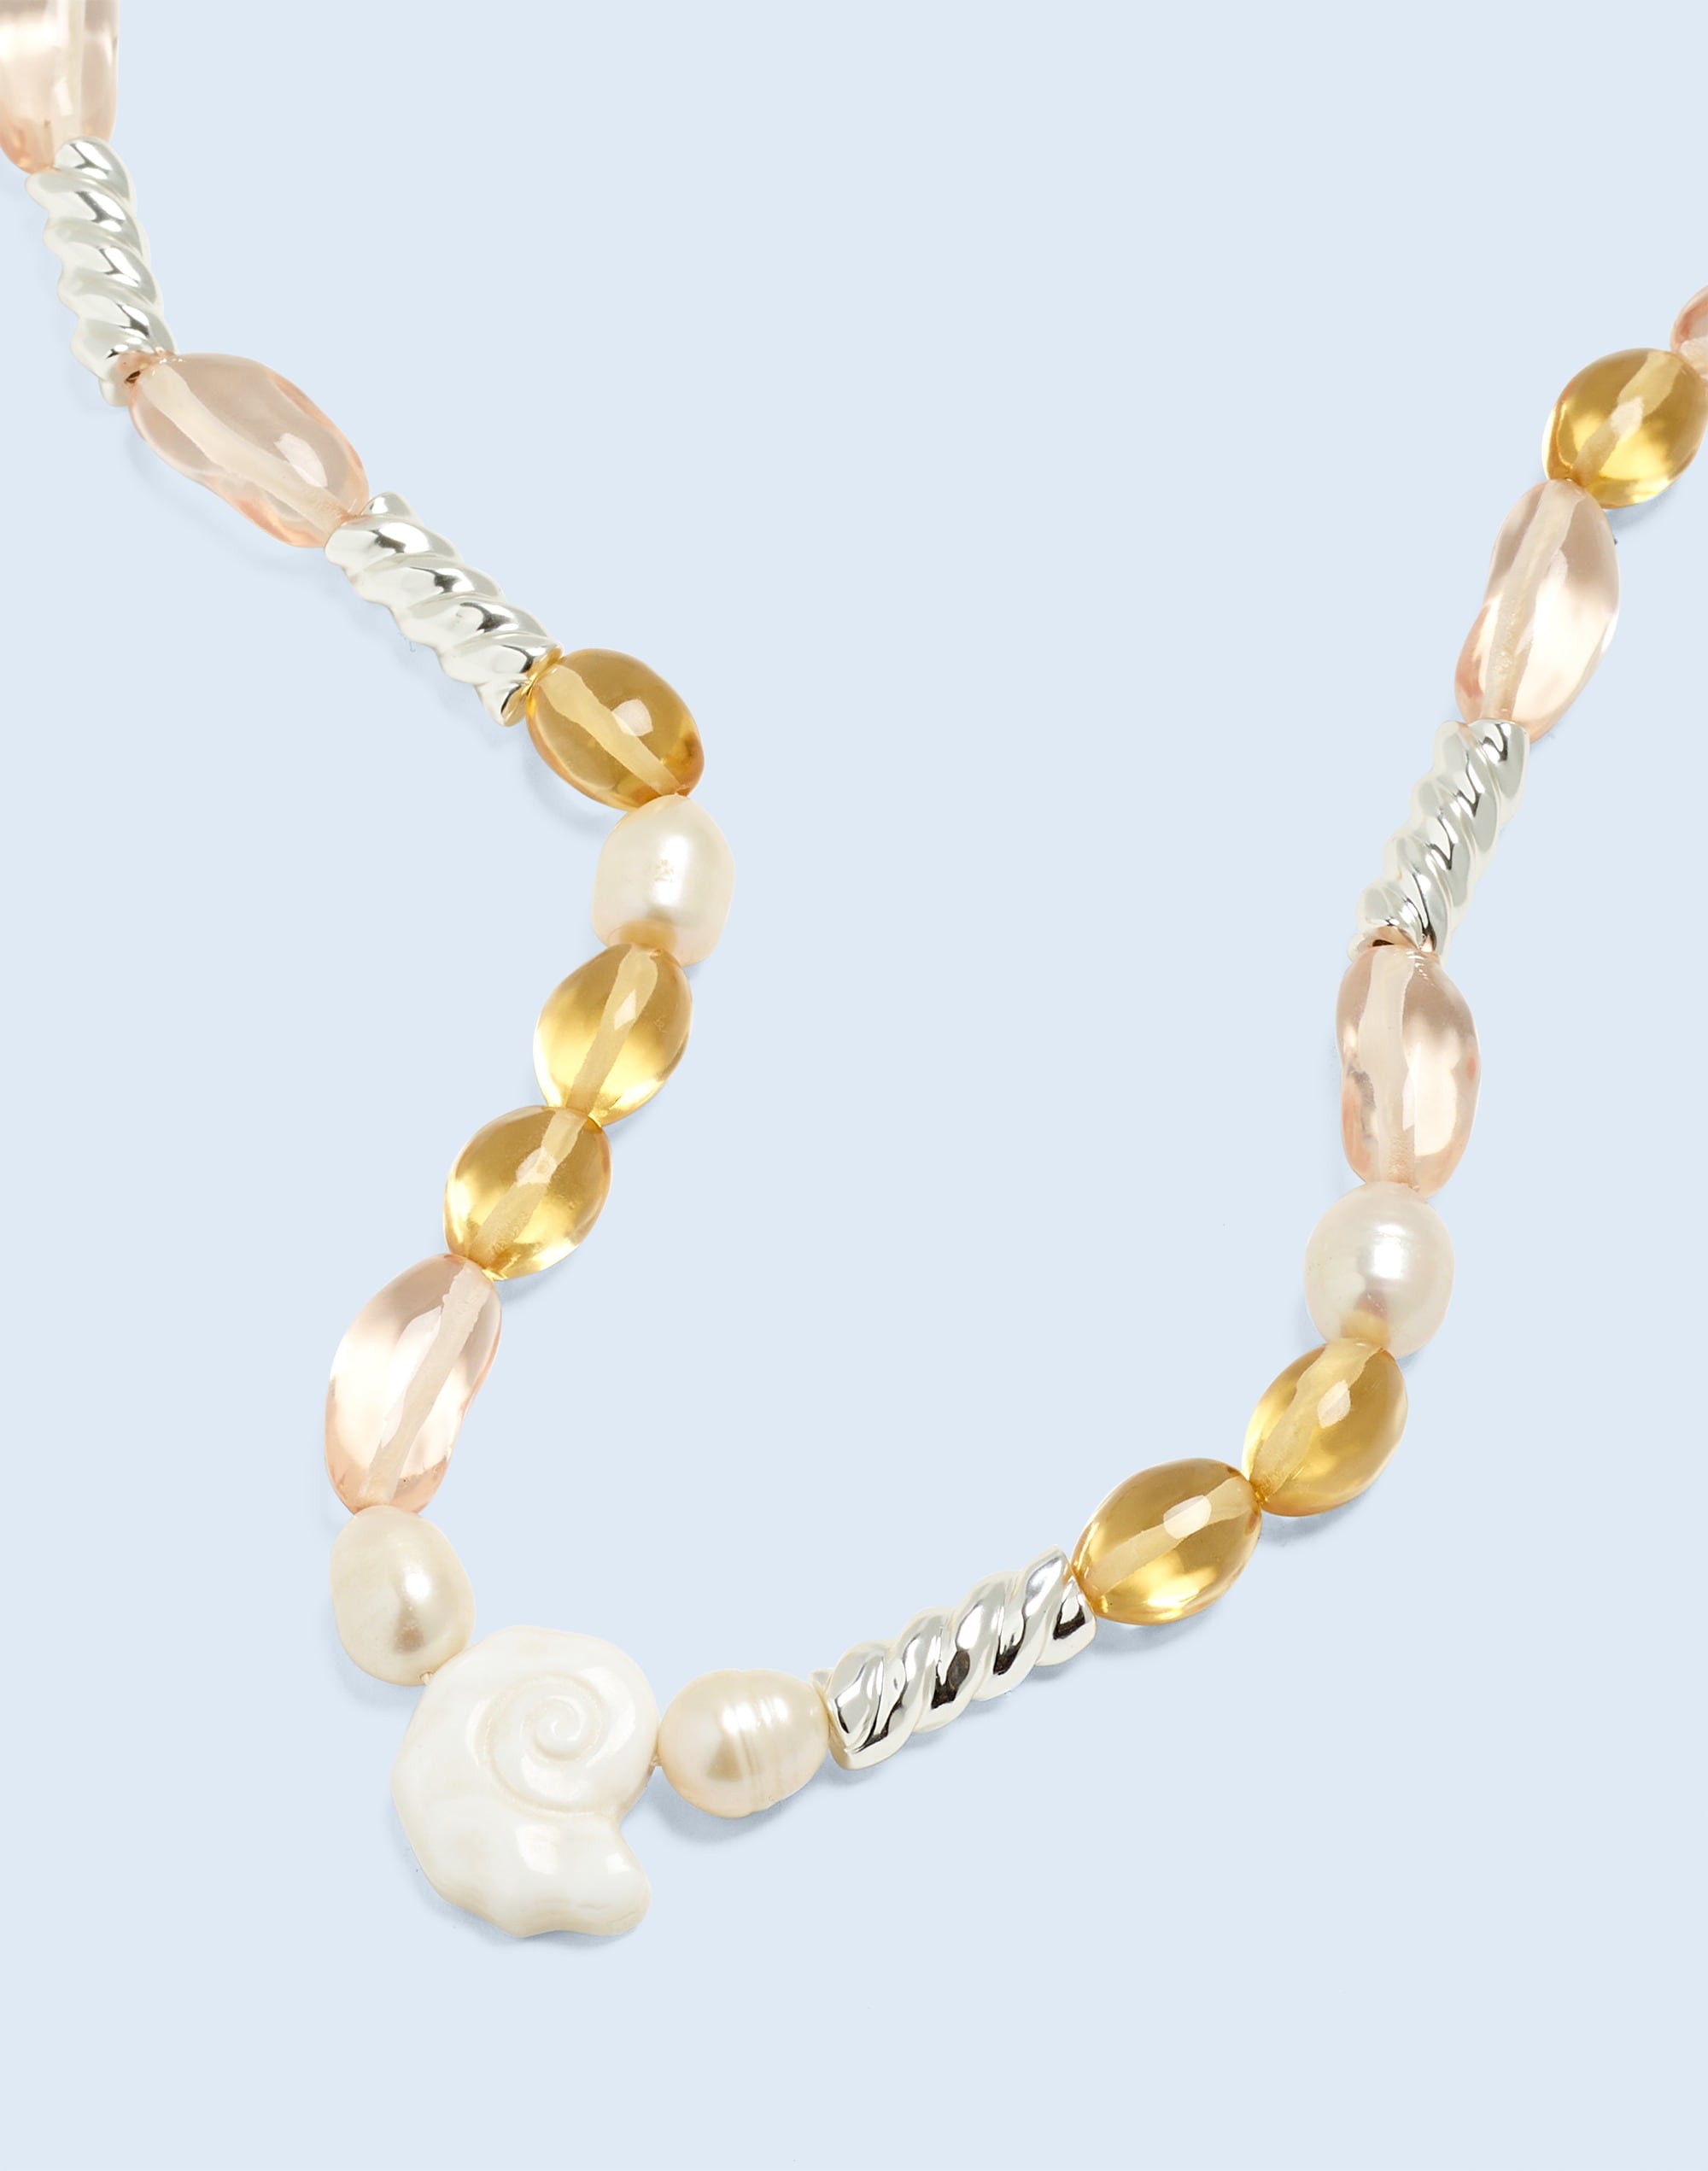 Mw Freshwater Pearl Nautical Beaded Necklace In Marine Pearl